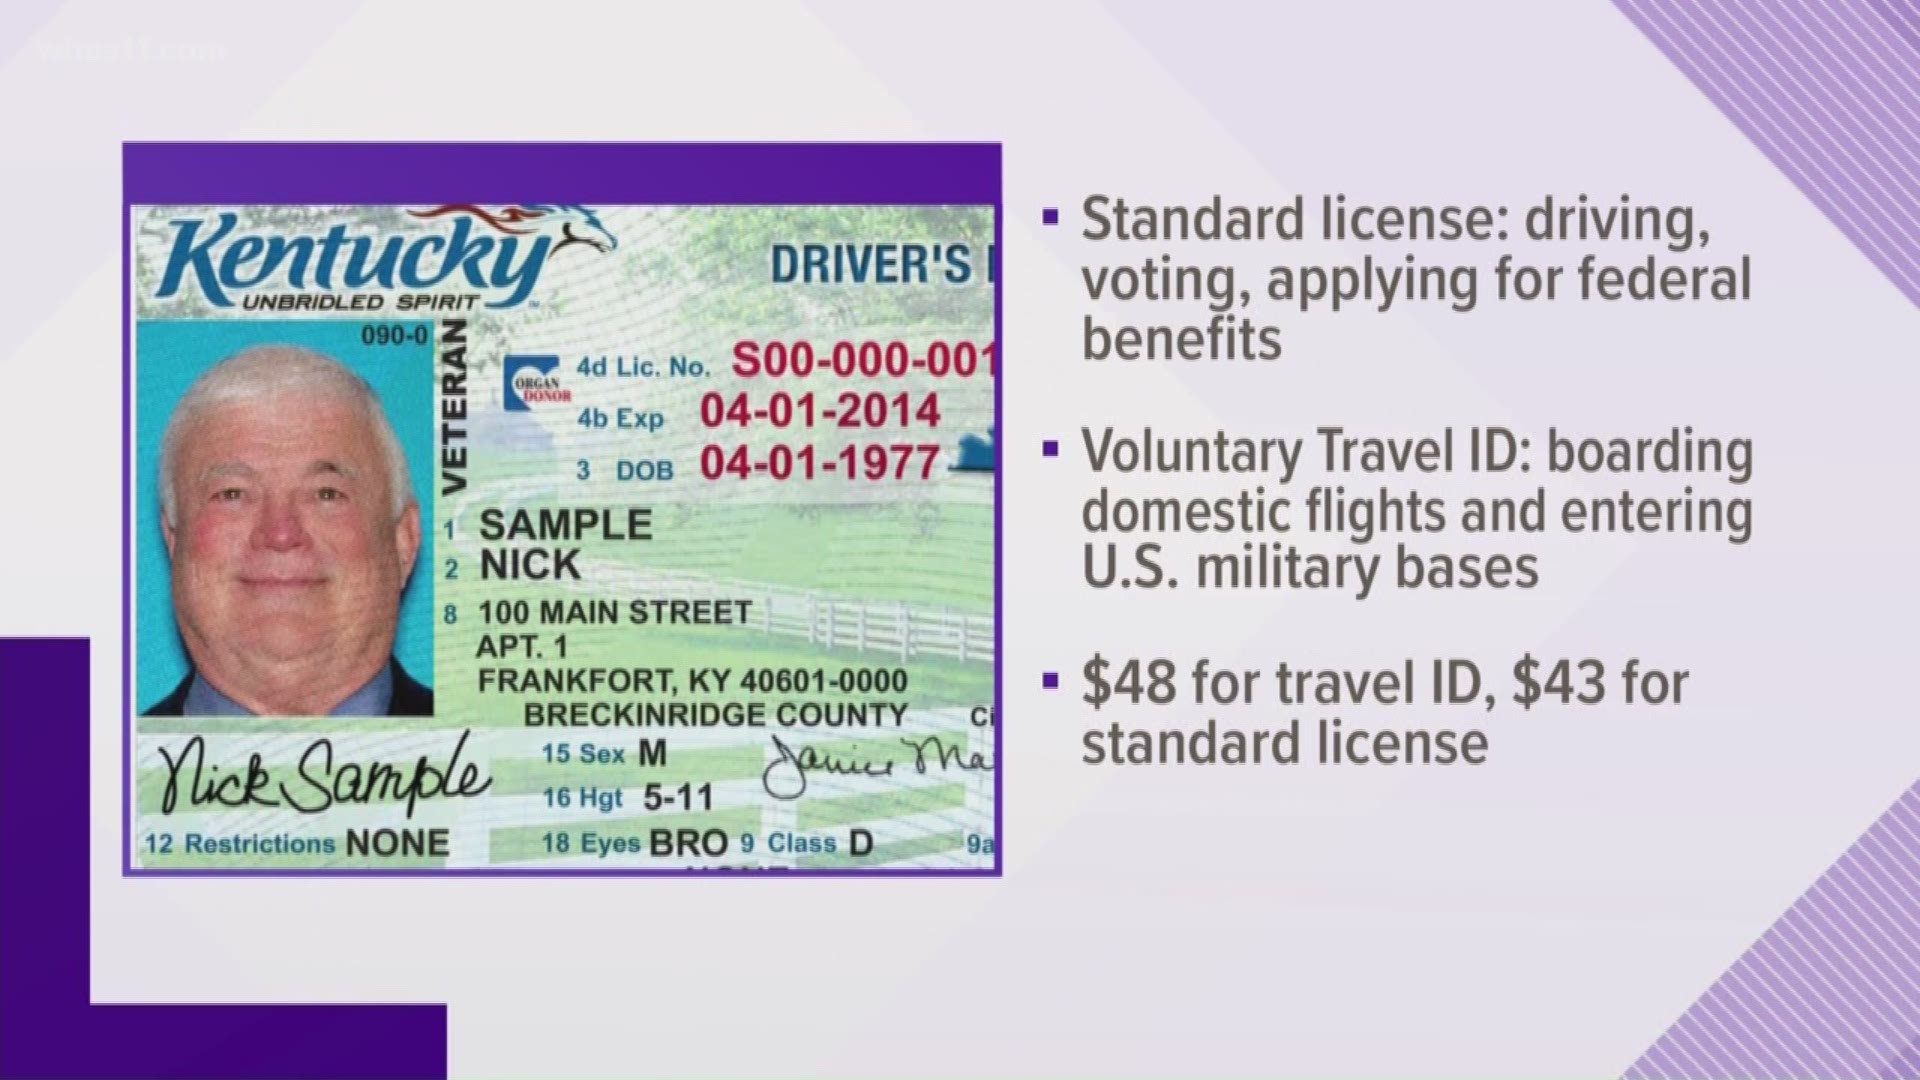 Travelers from Kentucky won't have to worry about taking their passport on domestic flights with the announcement of a new driver's license program in the state.